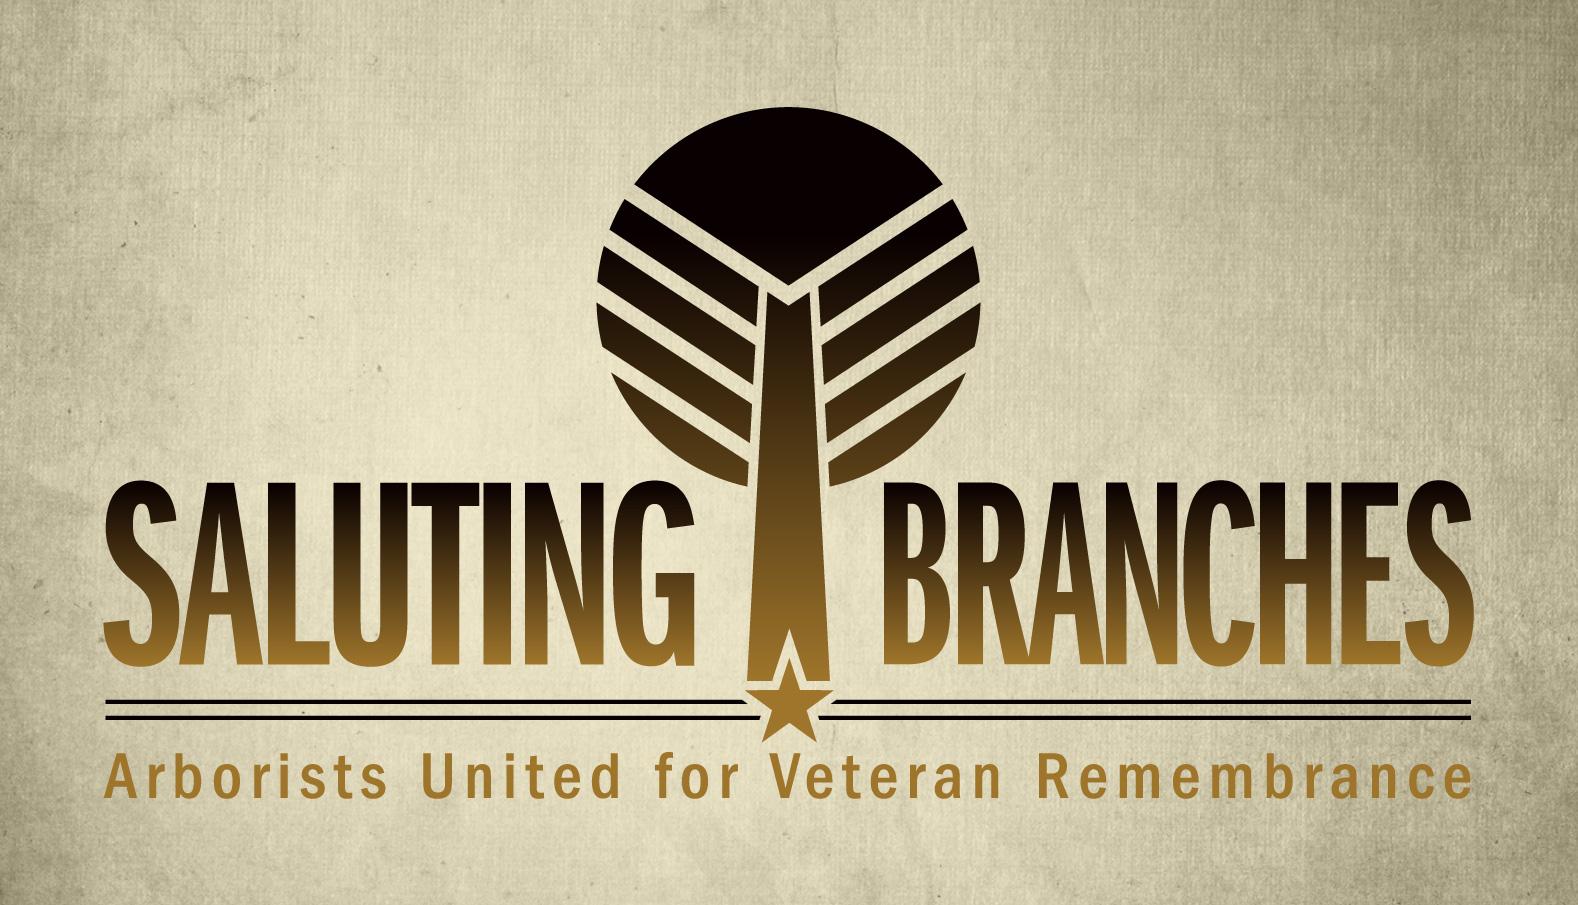 Branches Logo - Downloads - Saluting Branches